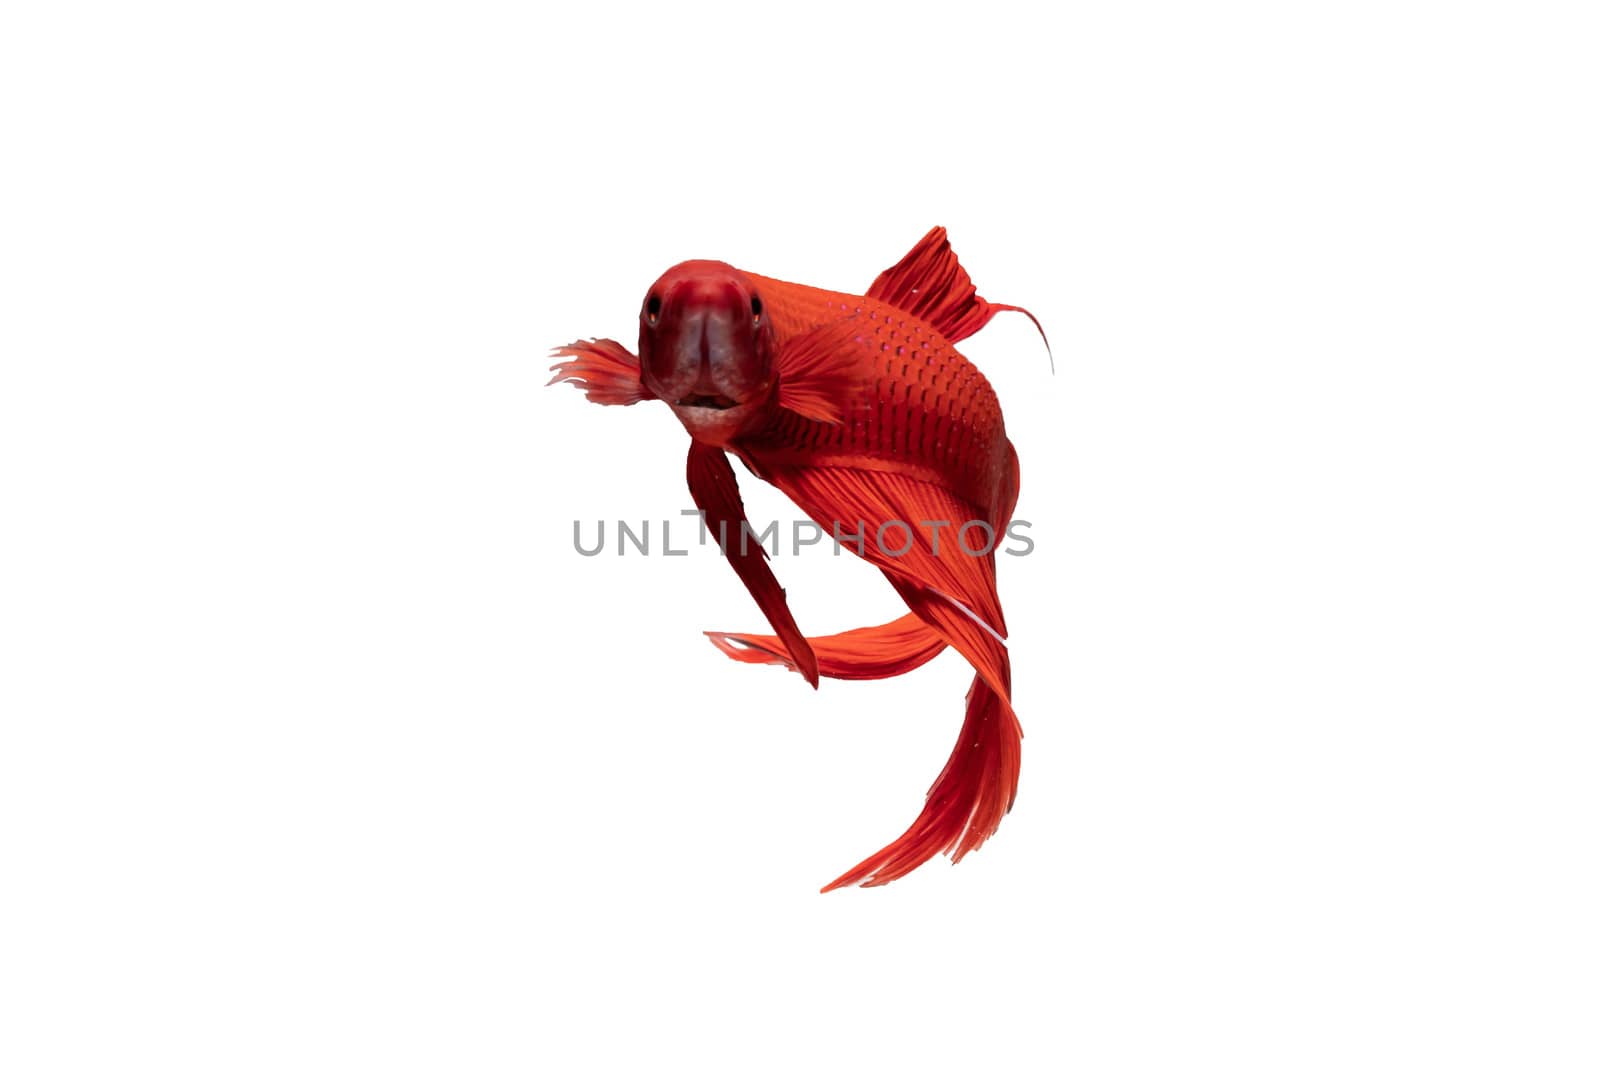 Moving moment of red Vailtail Siamese fighting fish or Betta splendens isolated on White background